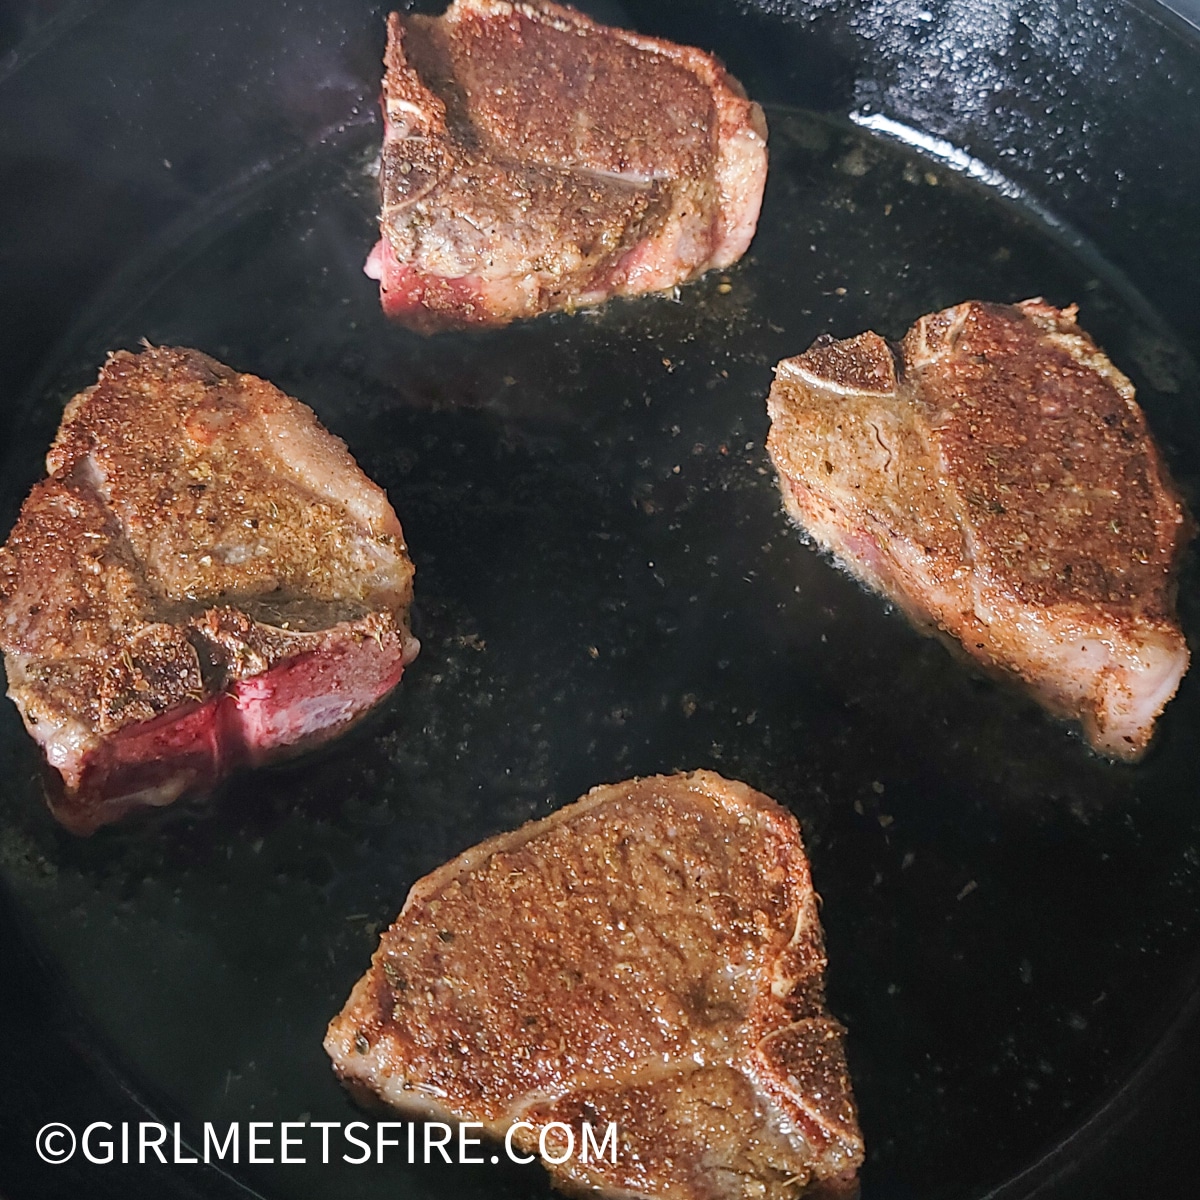 Lamb chops searing on a cast iron skillet